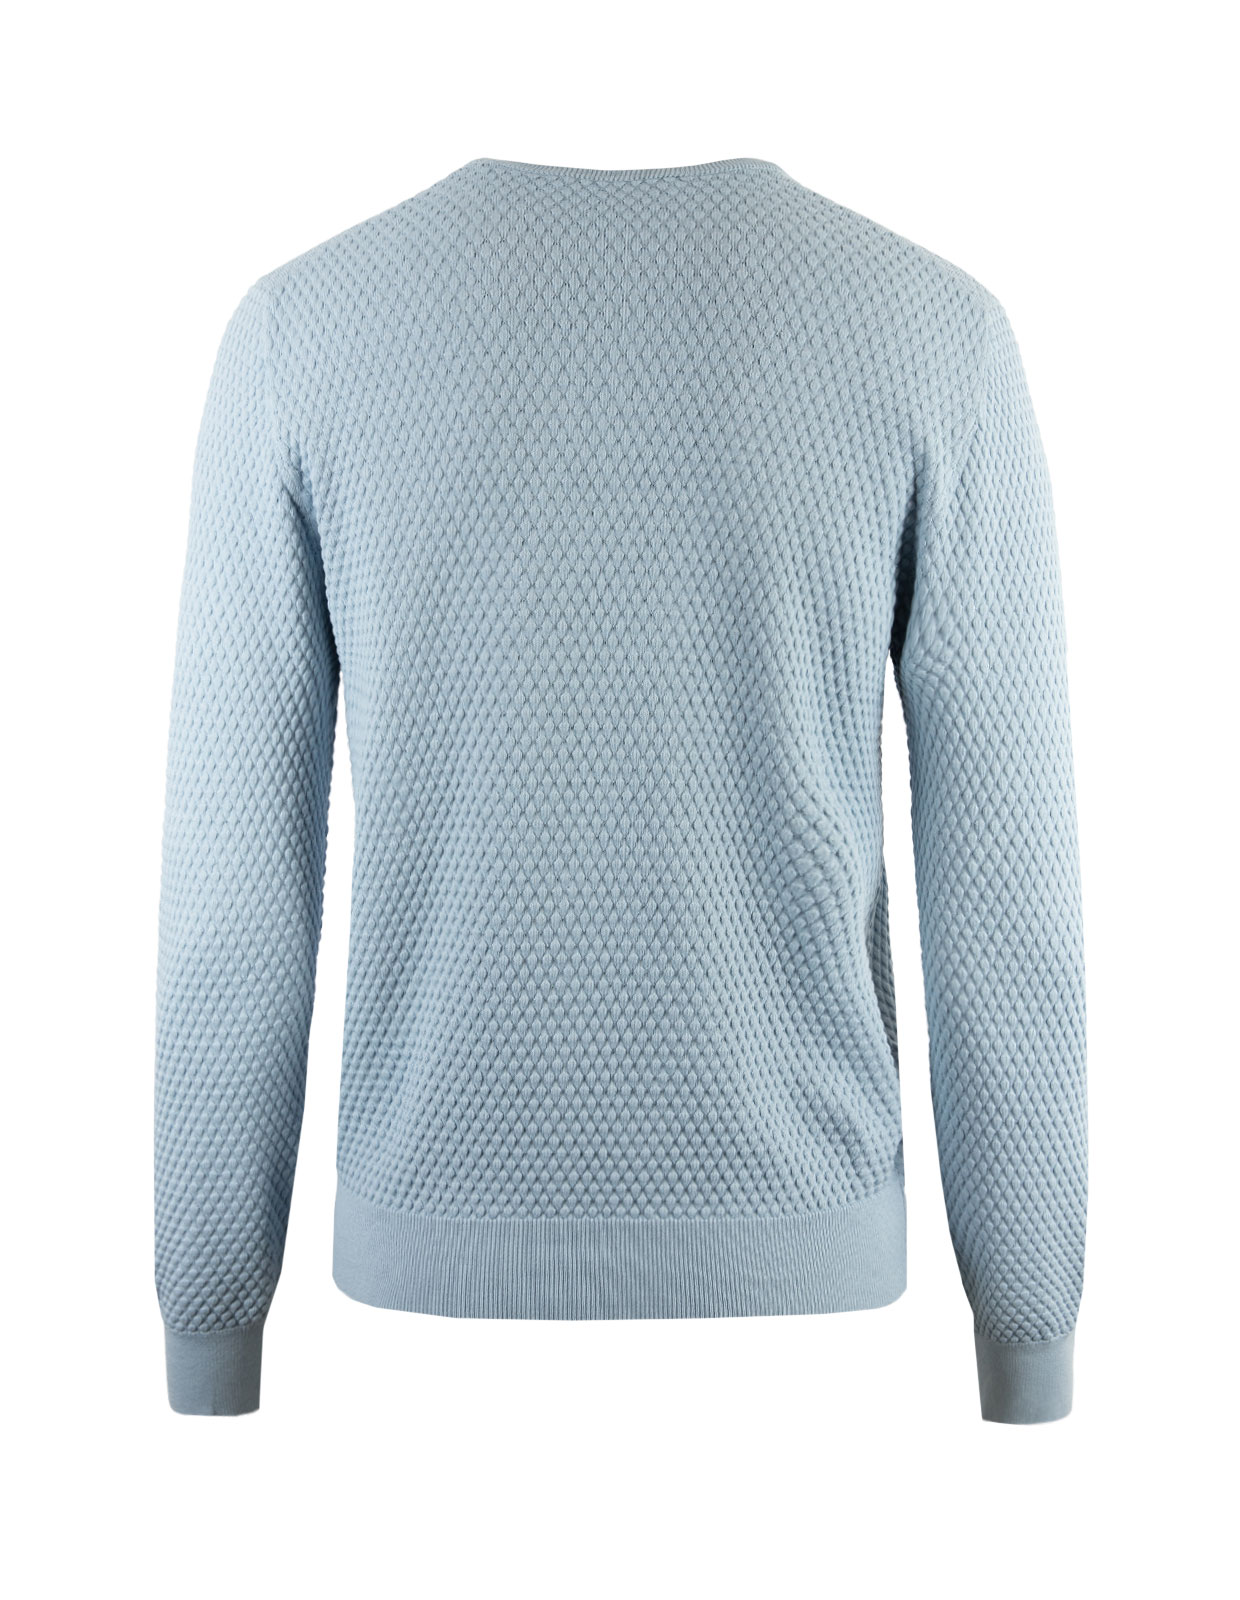 Bubble Knitted Crew Neck Light Blue